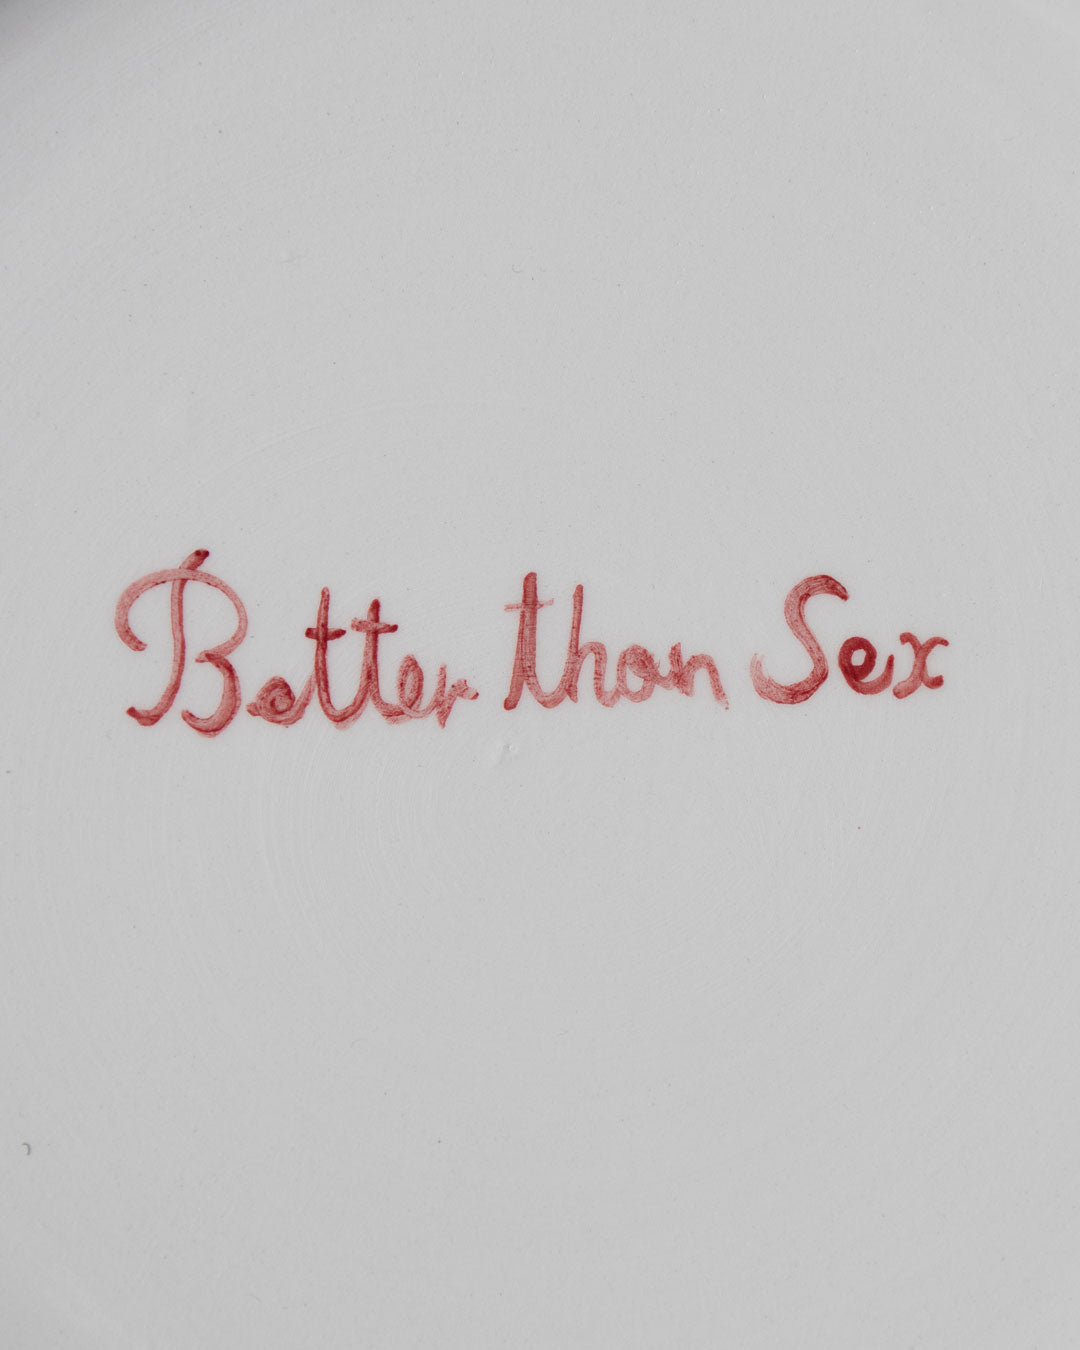 "Better then S*x" Fil Rouge Plate